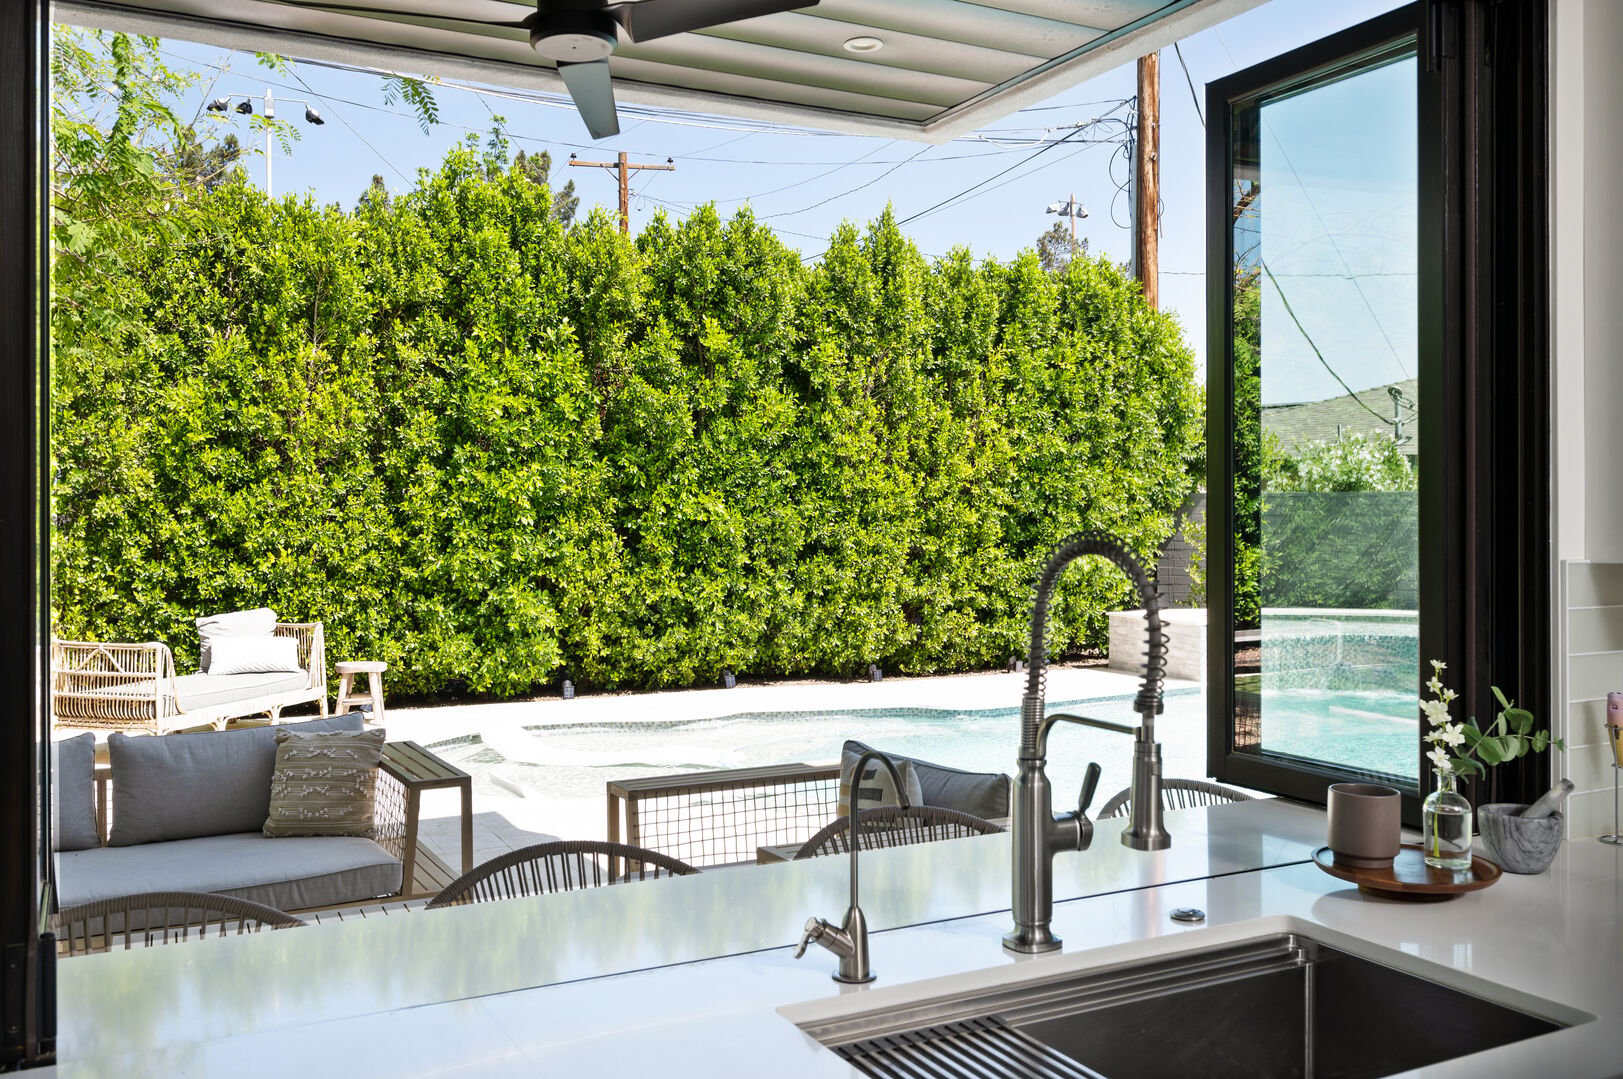 Views to the pool for easy entertaining.